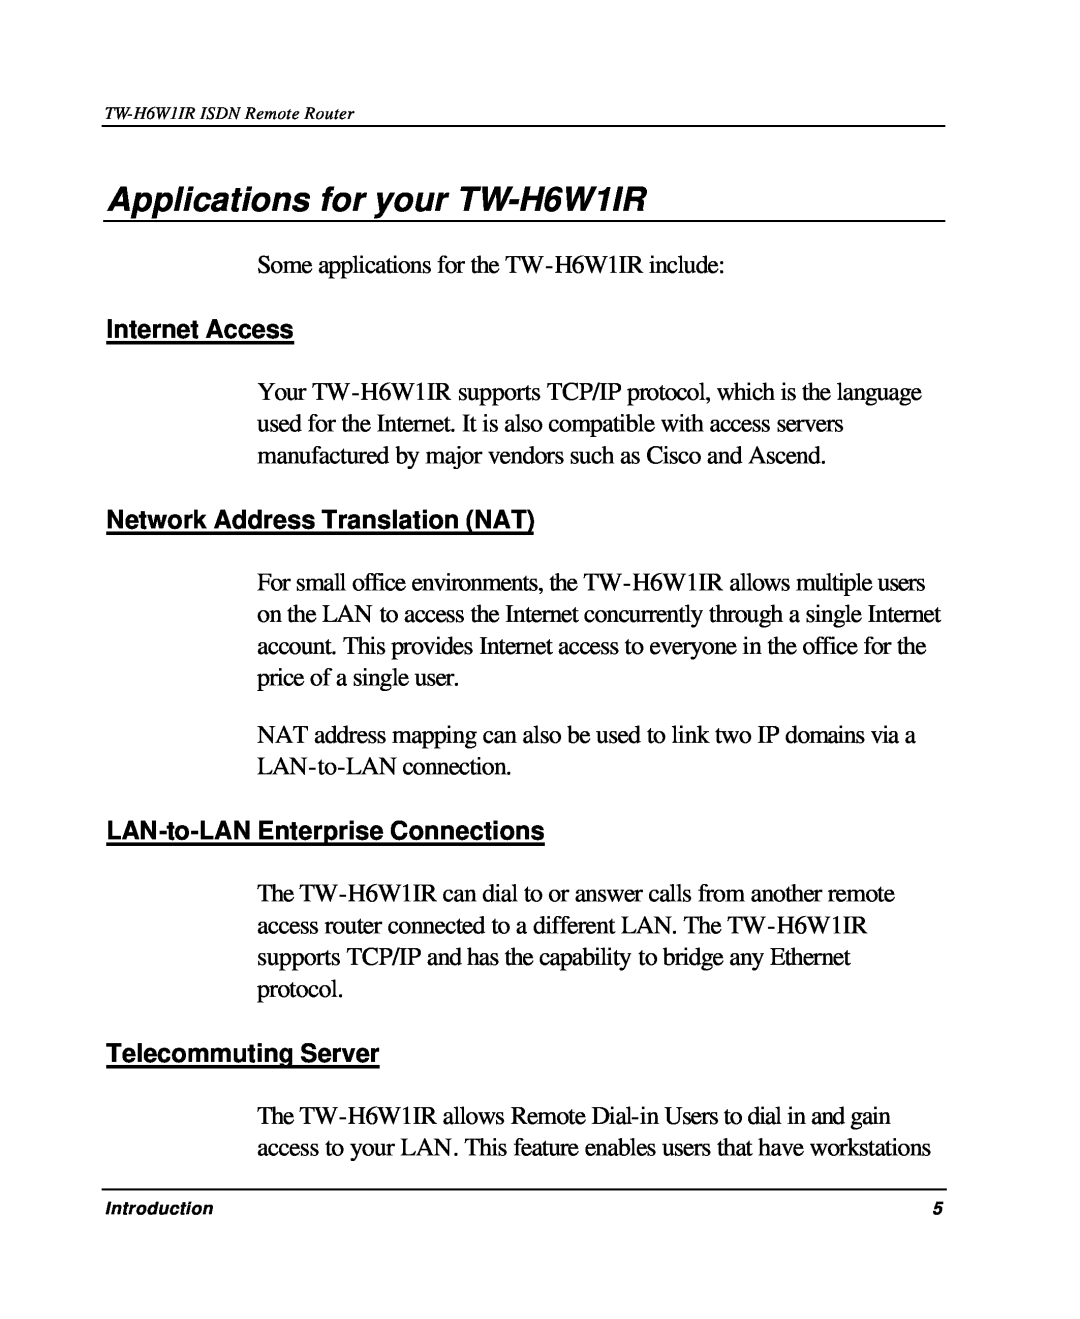 TRENDnet manual Applications for your TW-H6W1IR, Internet Access, Network Address Translation NAT, Telecommuting Server 